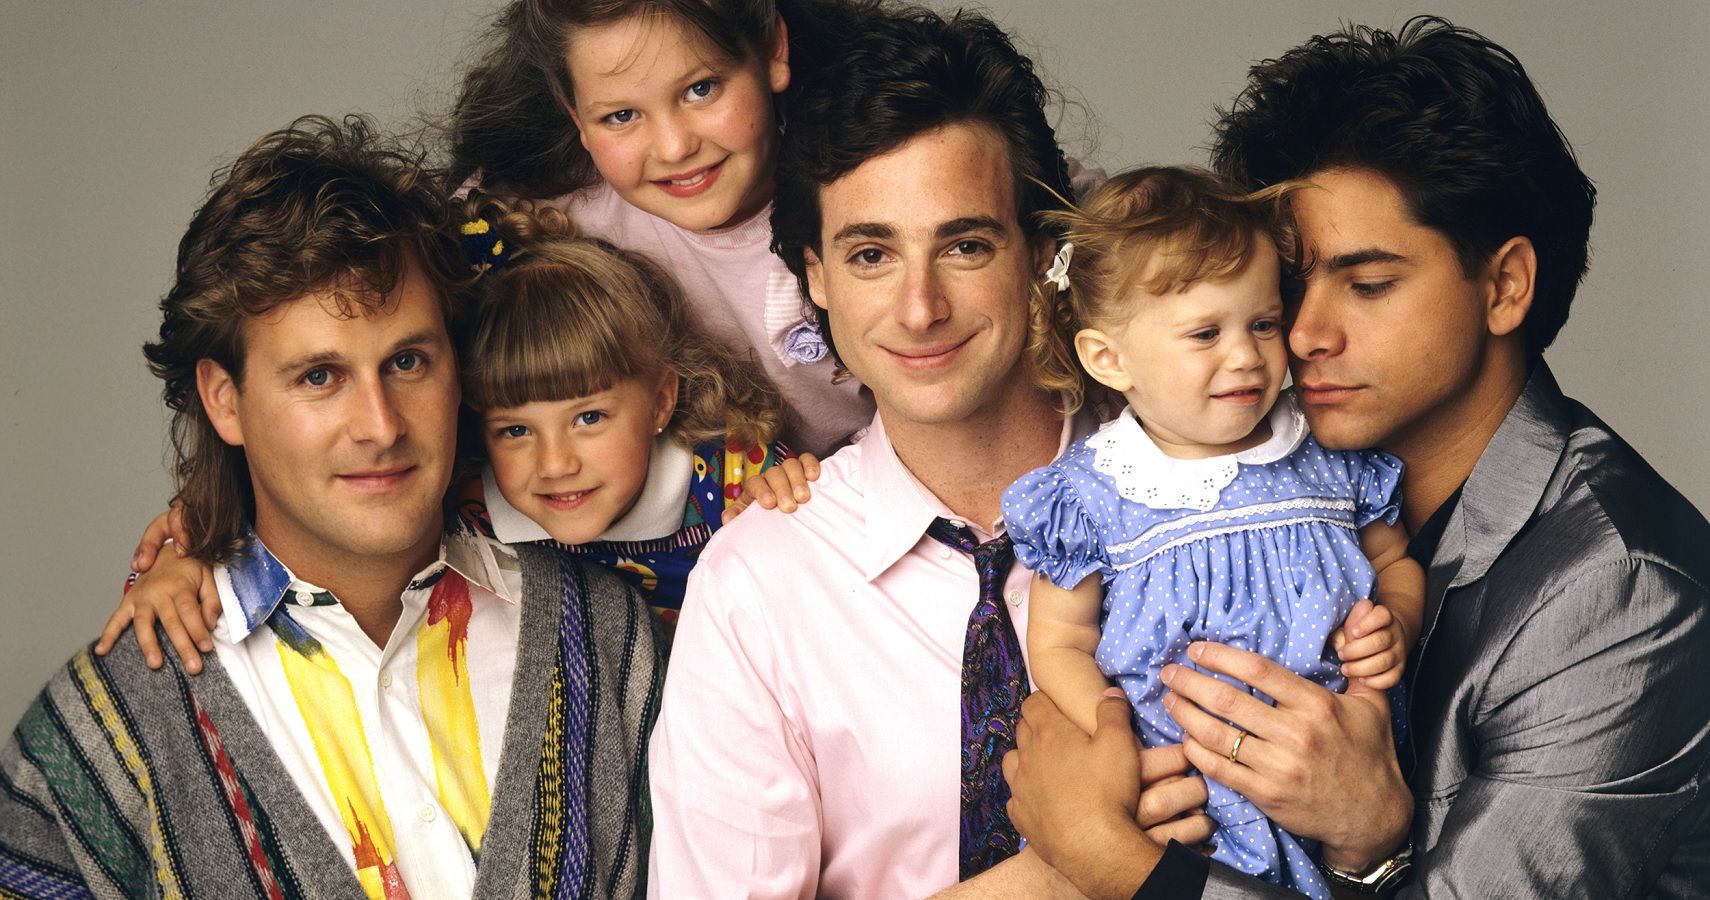 Full House The Best Episode Of Each Season, According To IMDb